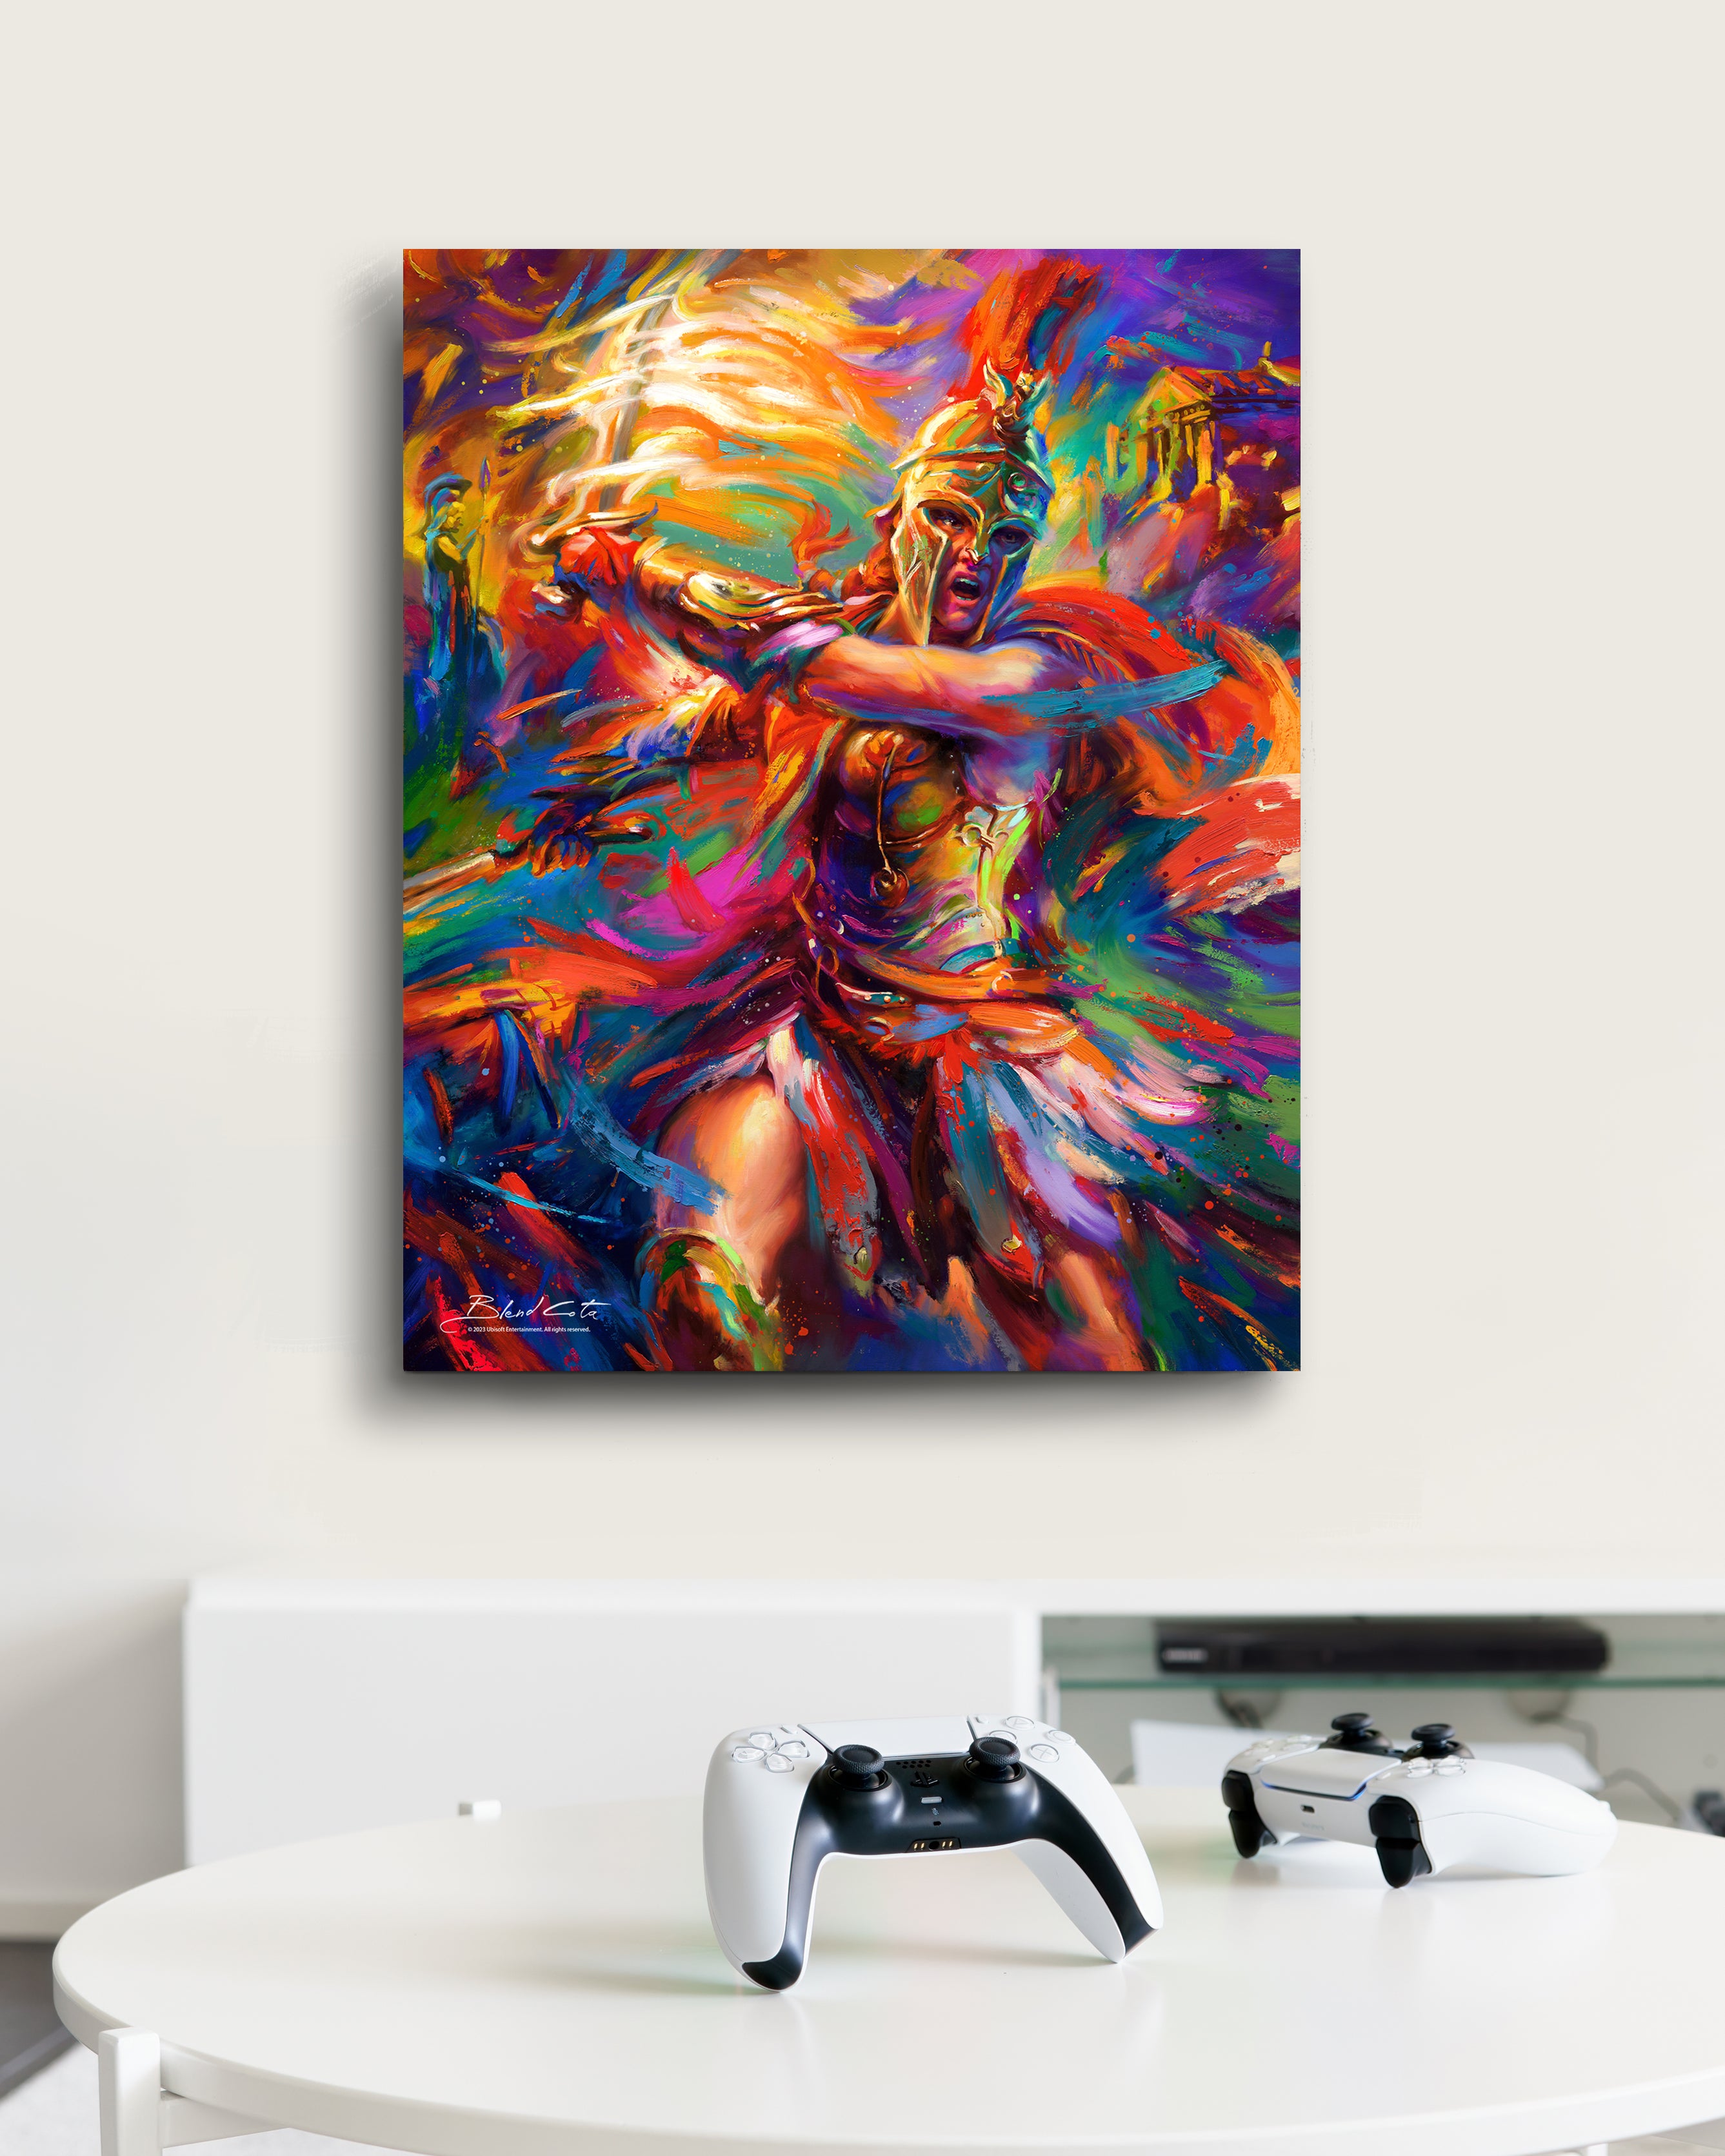 Limited Edition glossy metal print of Assassin's Creed Kassandra of Odyssey bursting forth with energy and painted with colorful brushstrokes in an expressionistic style in a room setting. 